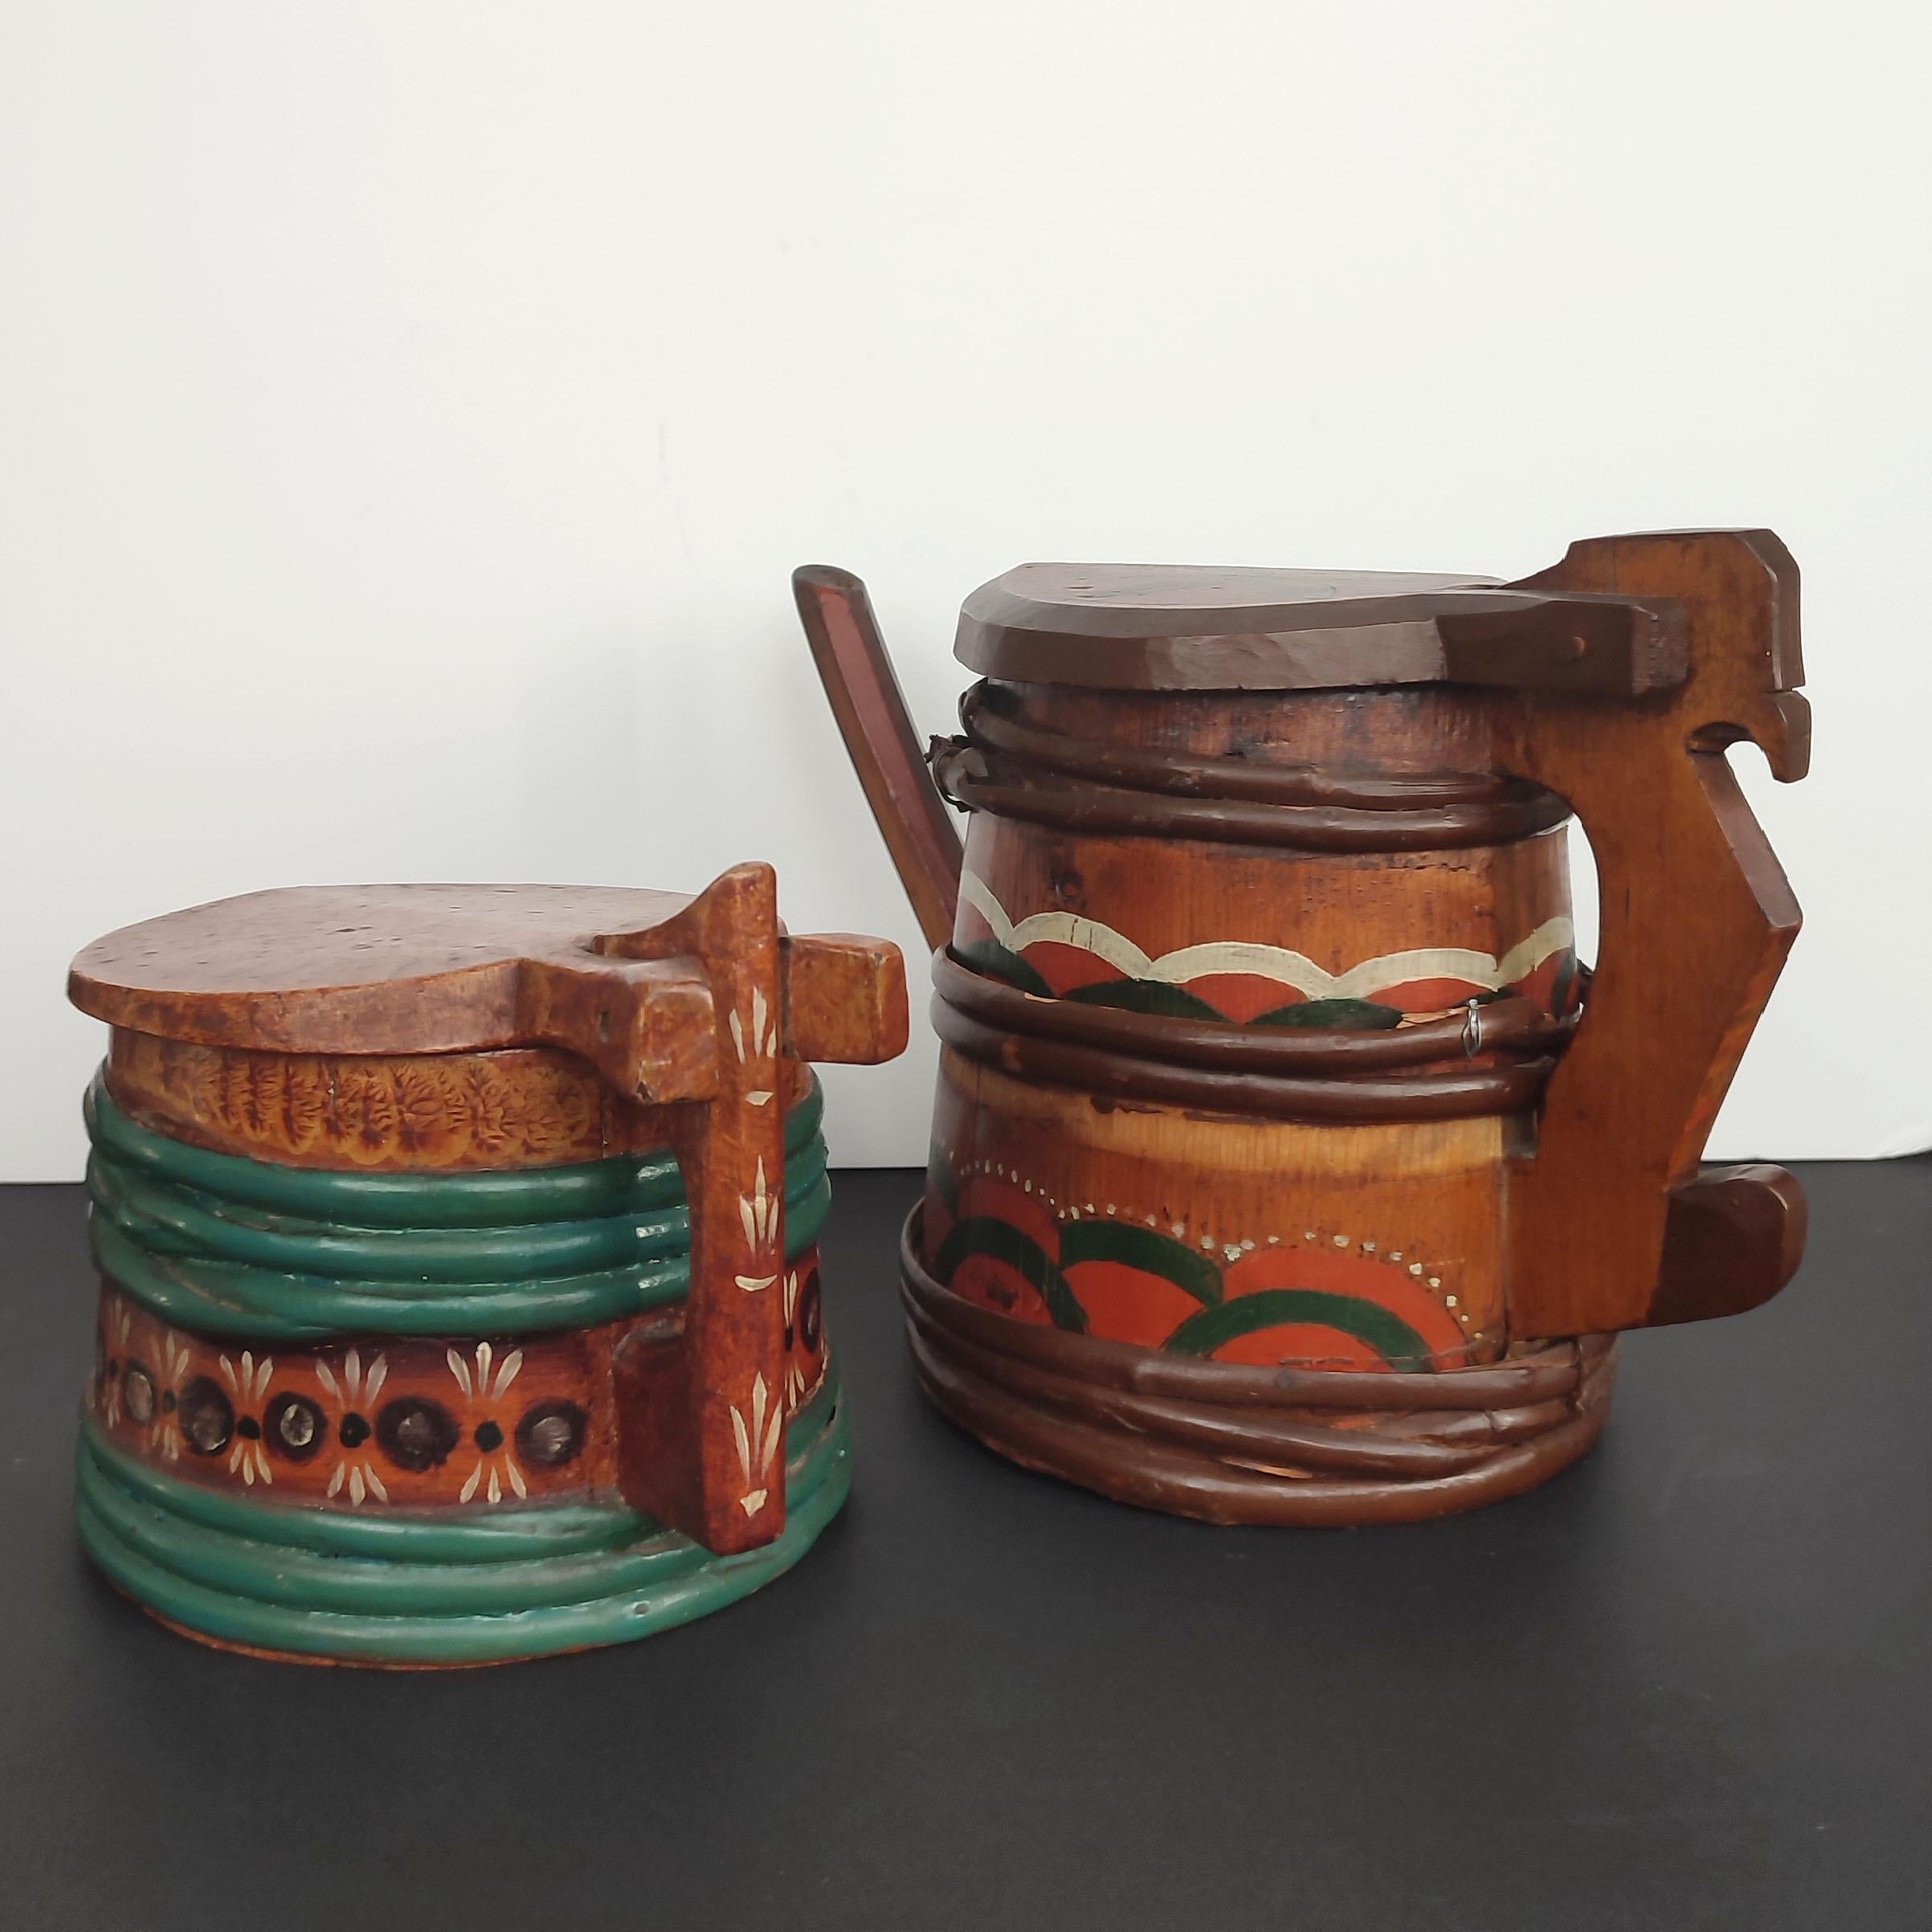 Swedish wooden Lidded Tankard and Pitcher, made of staves that are held together with split-branch banding. The lids are hinged. Both beautifully decorated in blue-green and oxblood red with accents of black and white. 
The pitcher is quite rare,